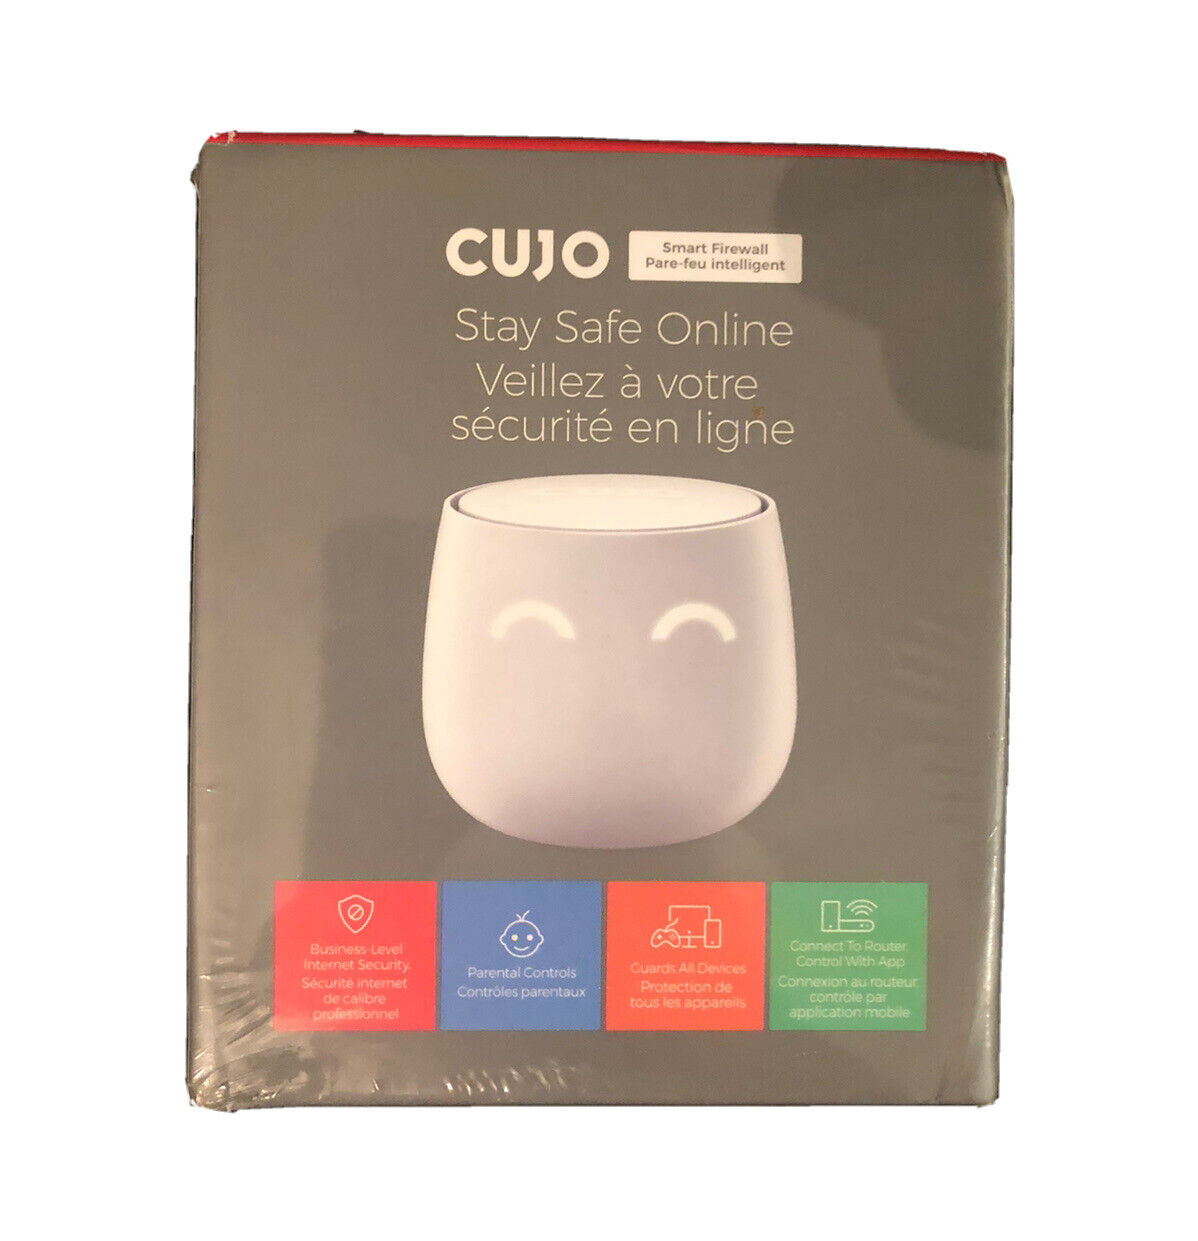 CUJO AI Smart Internet Security Firewall (2nd Gen) Protect Brand New Sealed